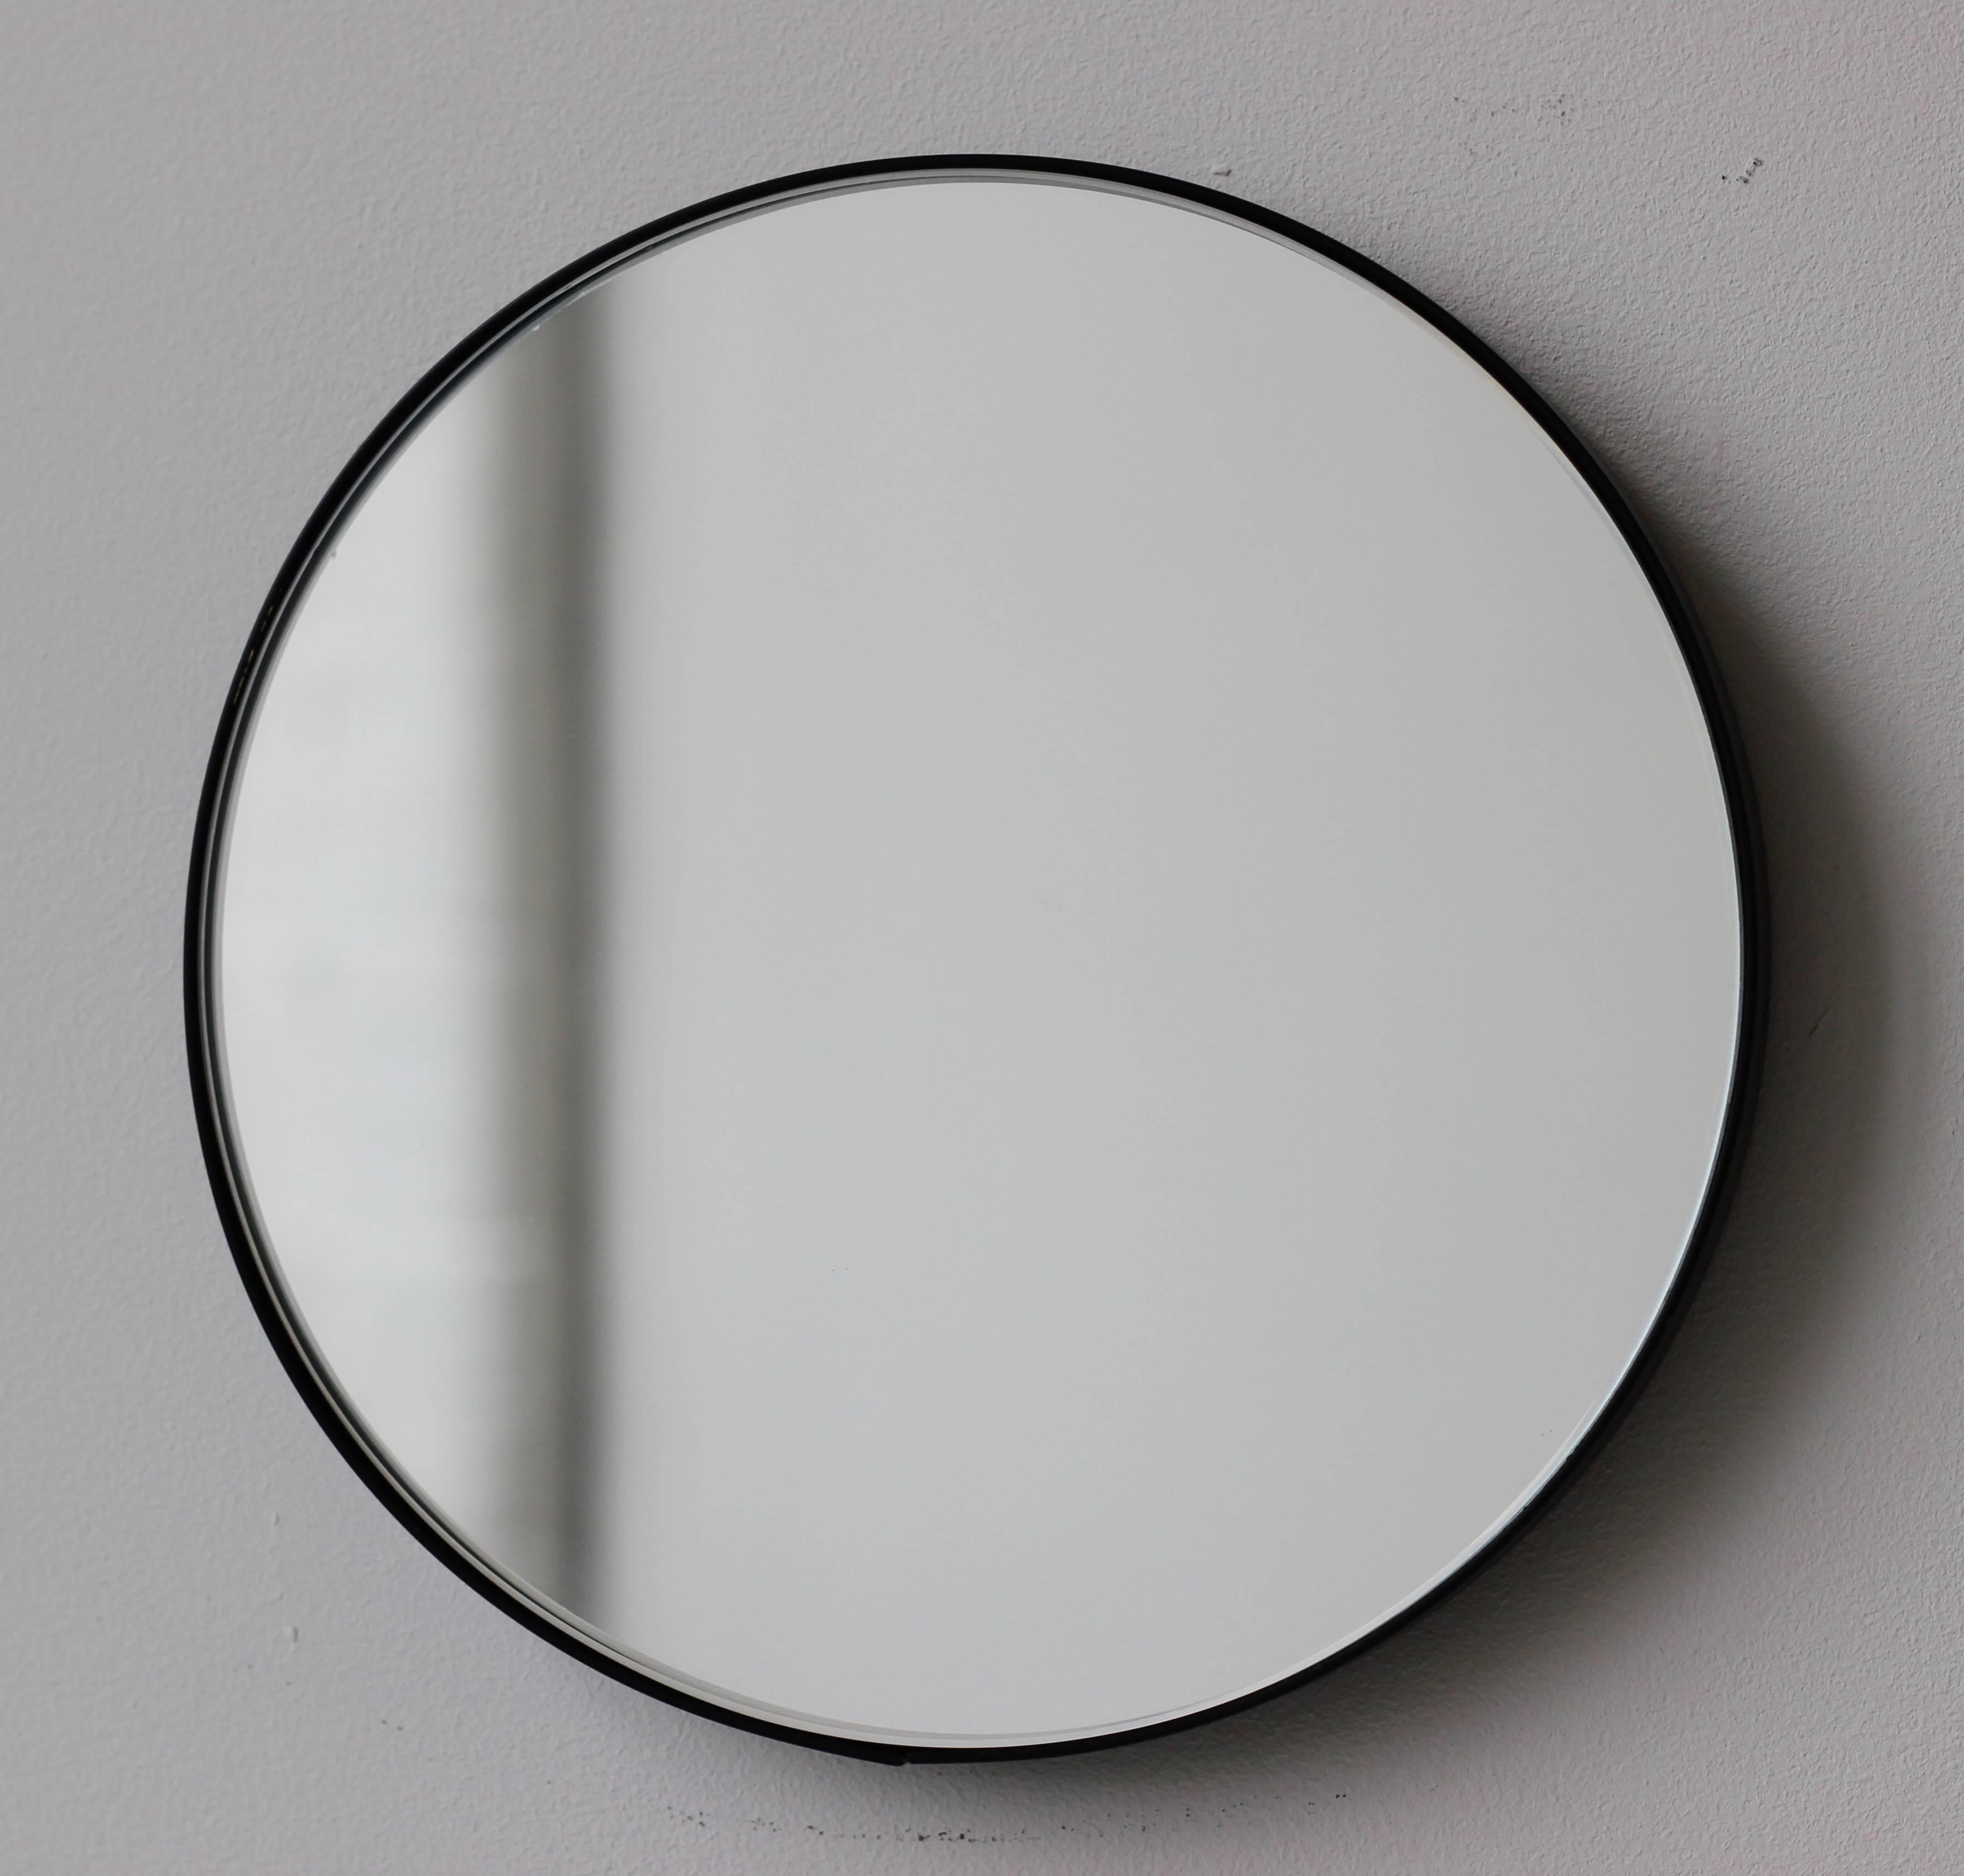 Minimalist round mirror with an elegant black powder coated aluminium frame. Designed and handcrafted in London, UK.

Medium, large and extra-large mirrors (60, 80 and 100cm) are fitted with an ingenious French cleat (split batten) system so they